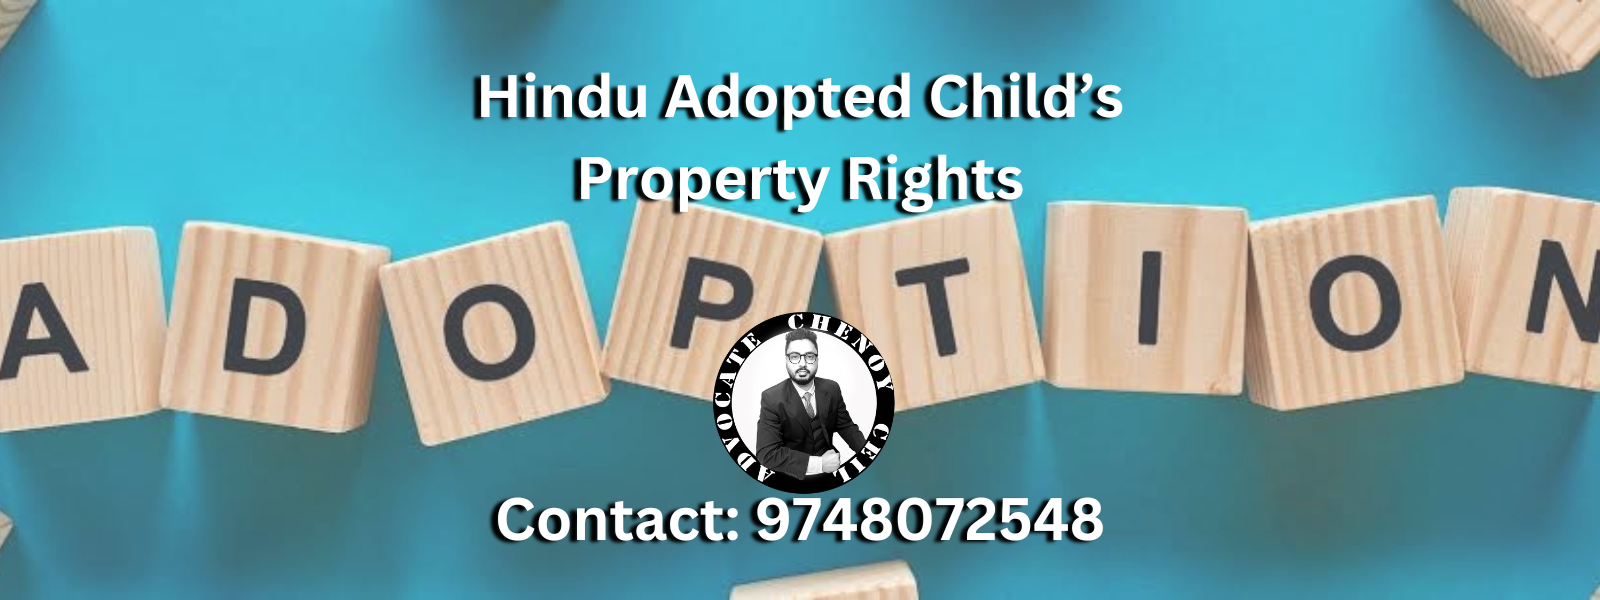 Property Rights of Hindu Adopted Child